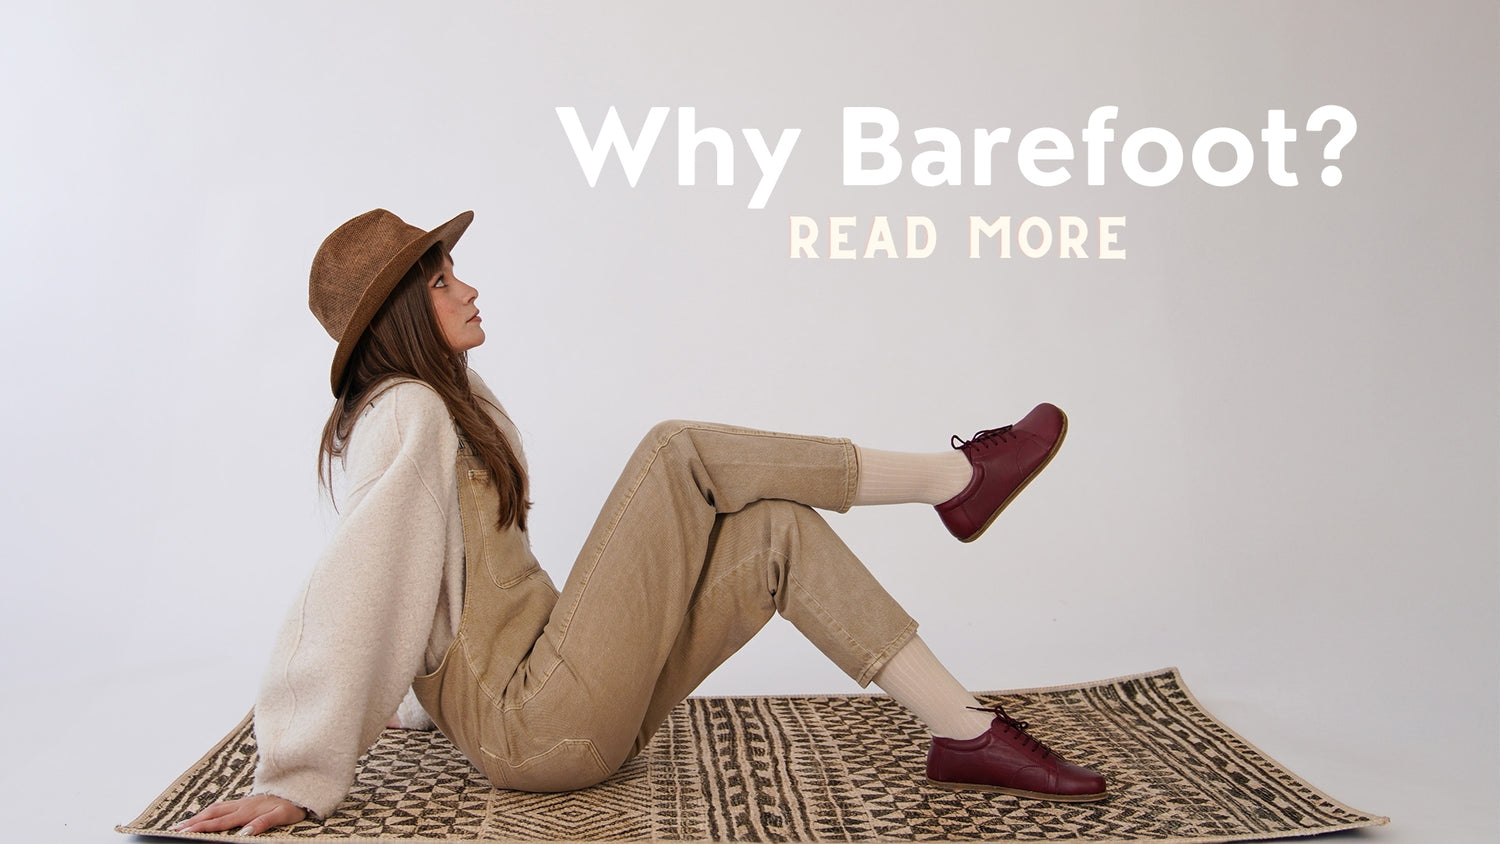 Woman in burgundy lace-up shoes and casual attire on a rug, with 'Why Barefoot? Read More' text in minimalist white font.